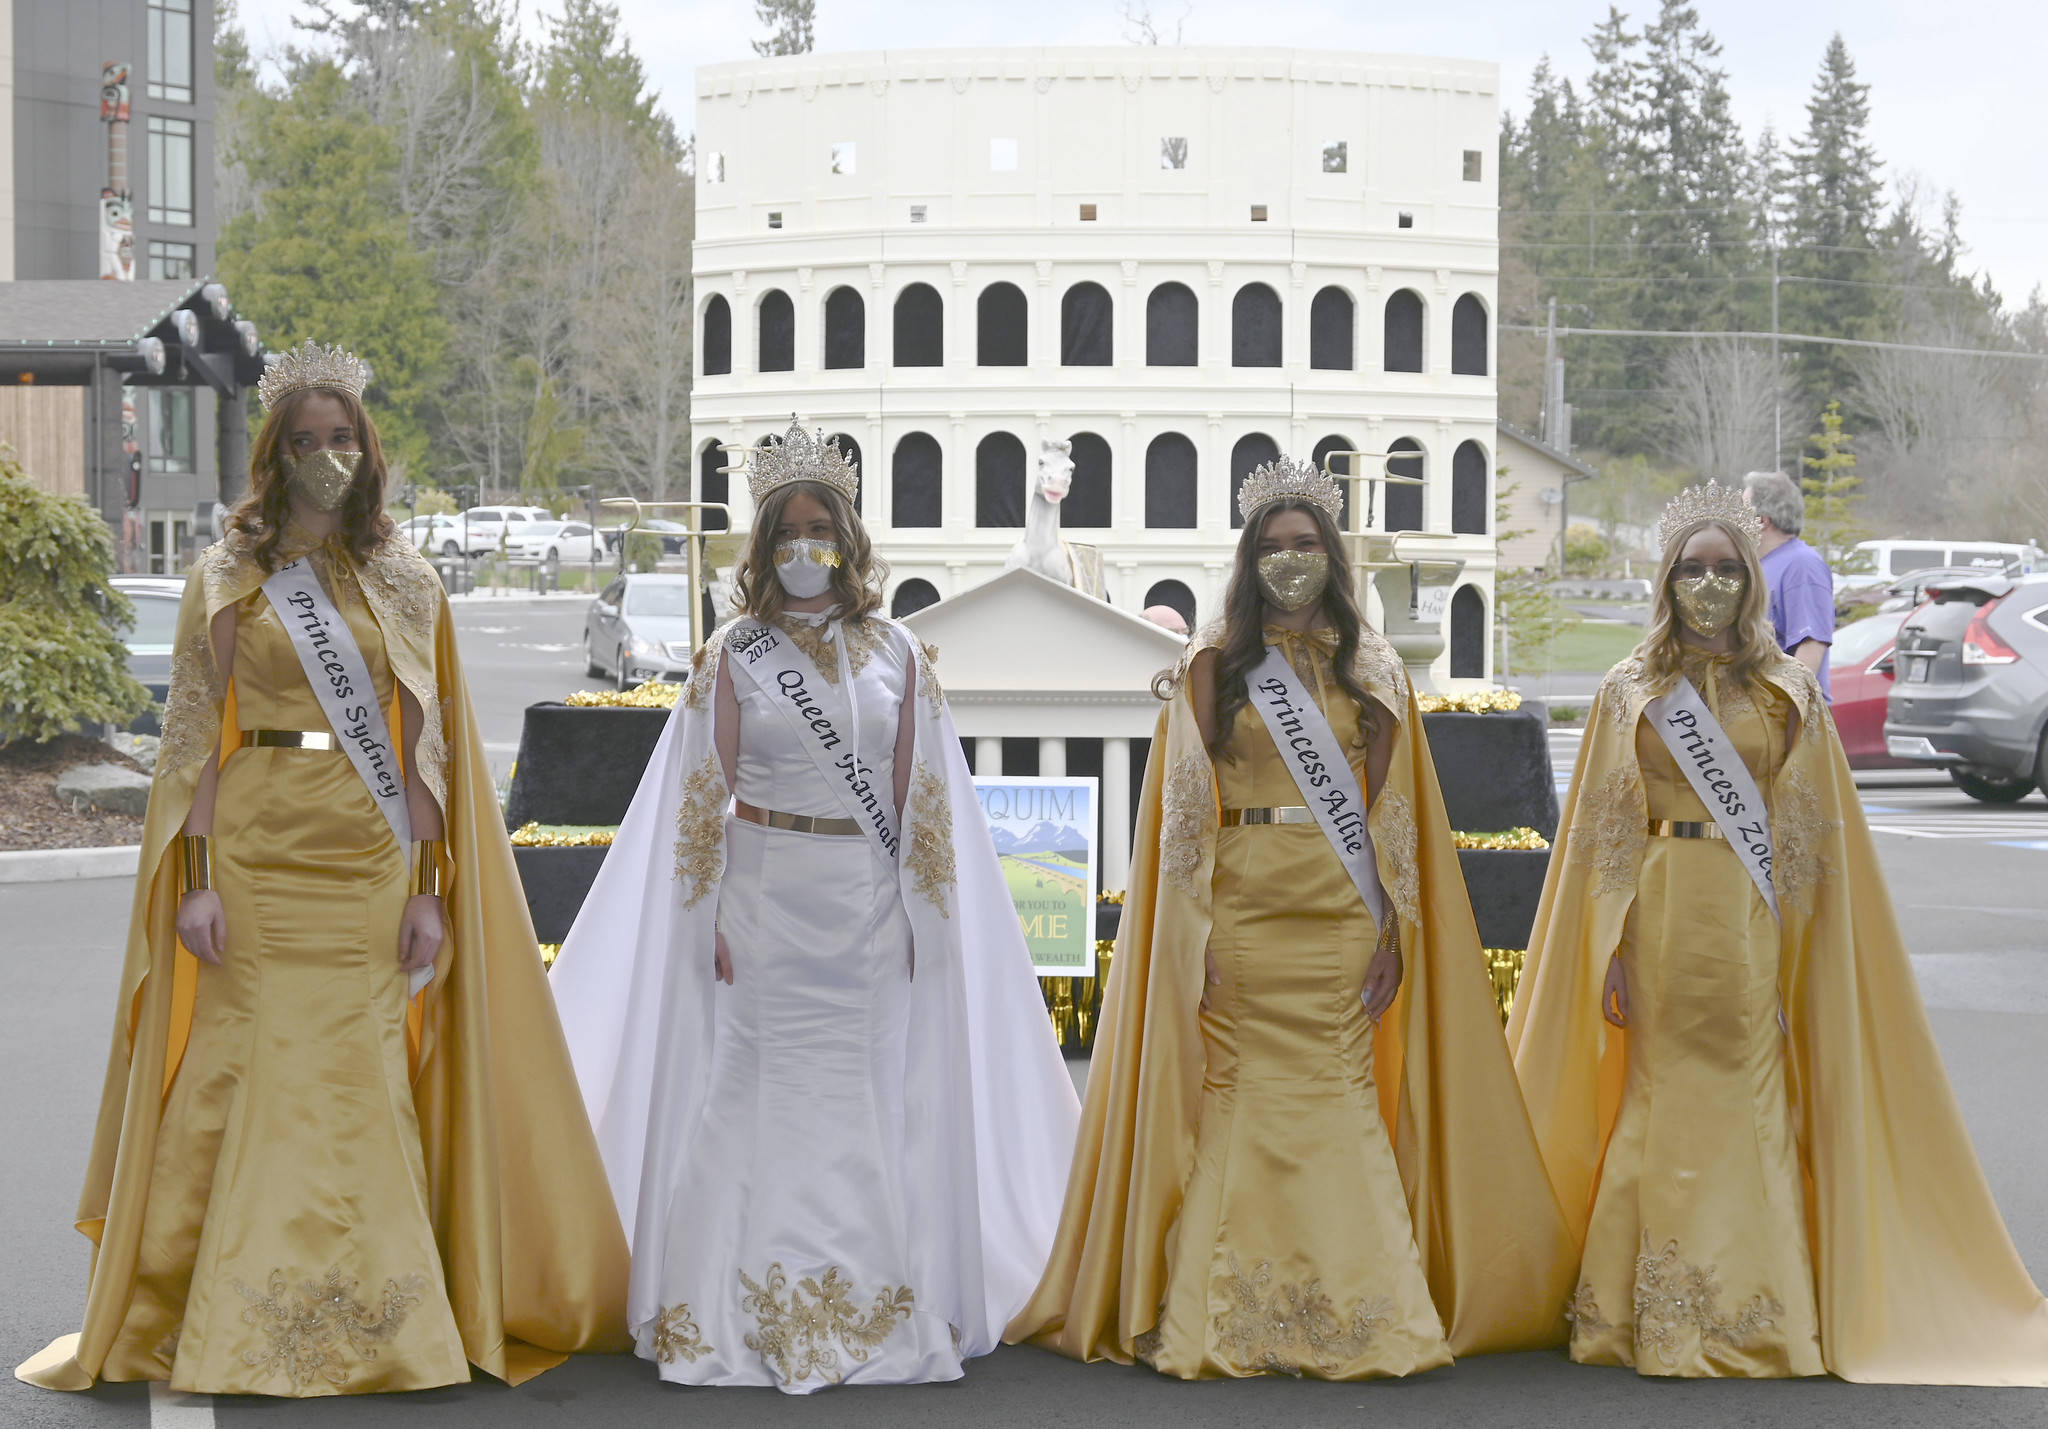 The Sequim Irrigation Festival’s royalty for 2021 (from left, princess Sydney VanProyen, queen Hannah Hampton, and princesses Allie Gale and Zoee Kuperus) will travel through Sequim on May 8 for the Grand Parade/Procession at 5 p.m. View it online or in-person, with the route to be revealed online at irrigationfestival.com on May 7. Sequim Gazette file photo by Michael Dashiell